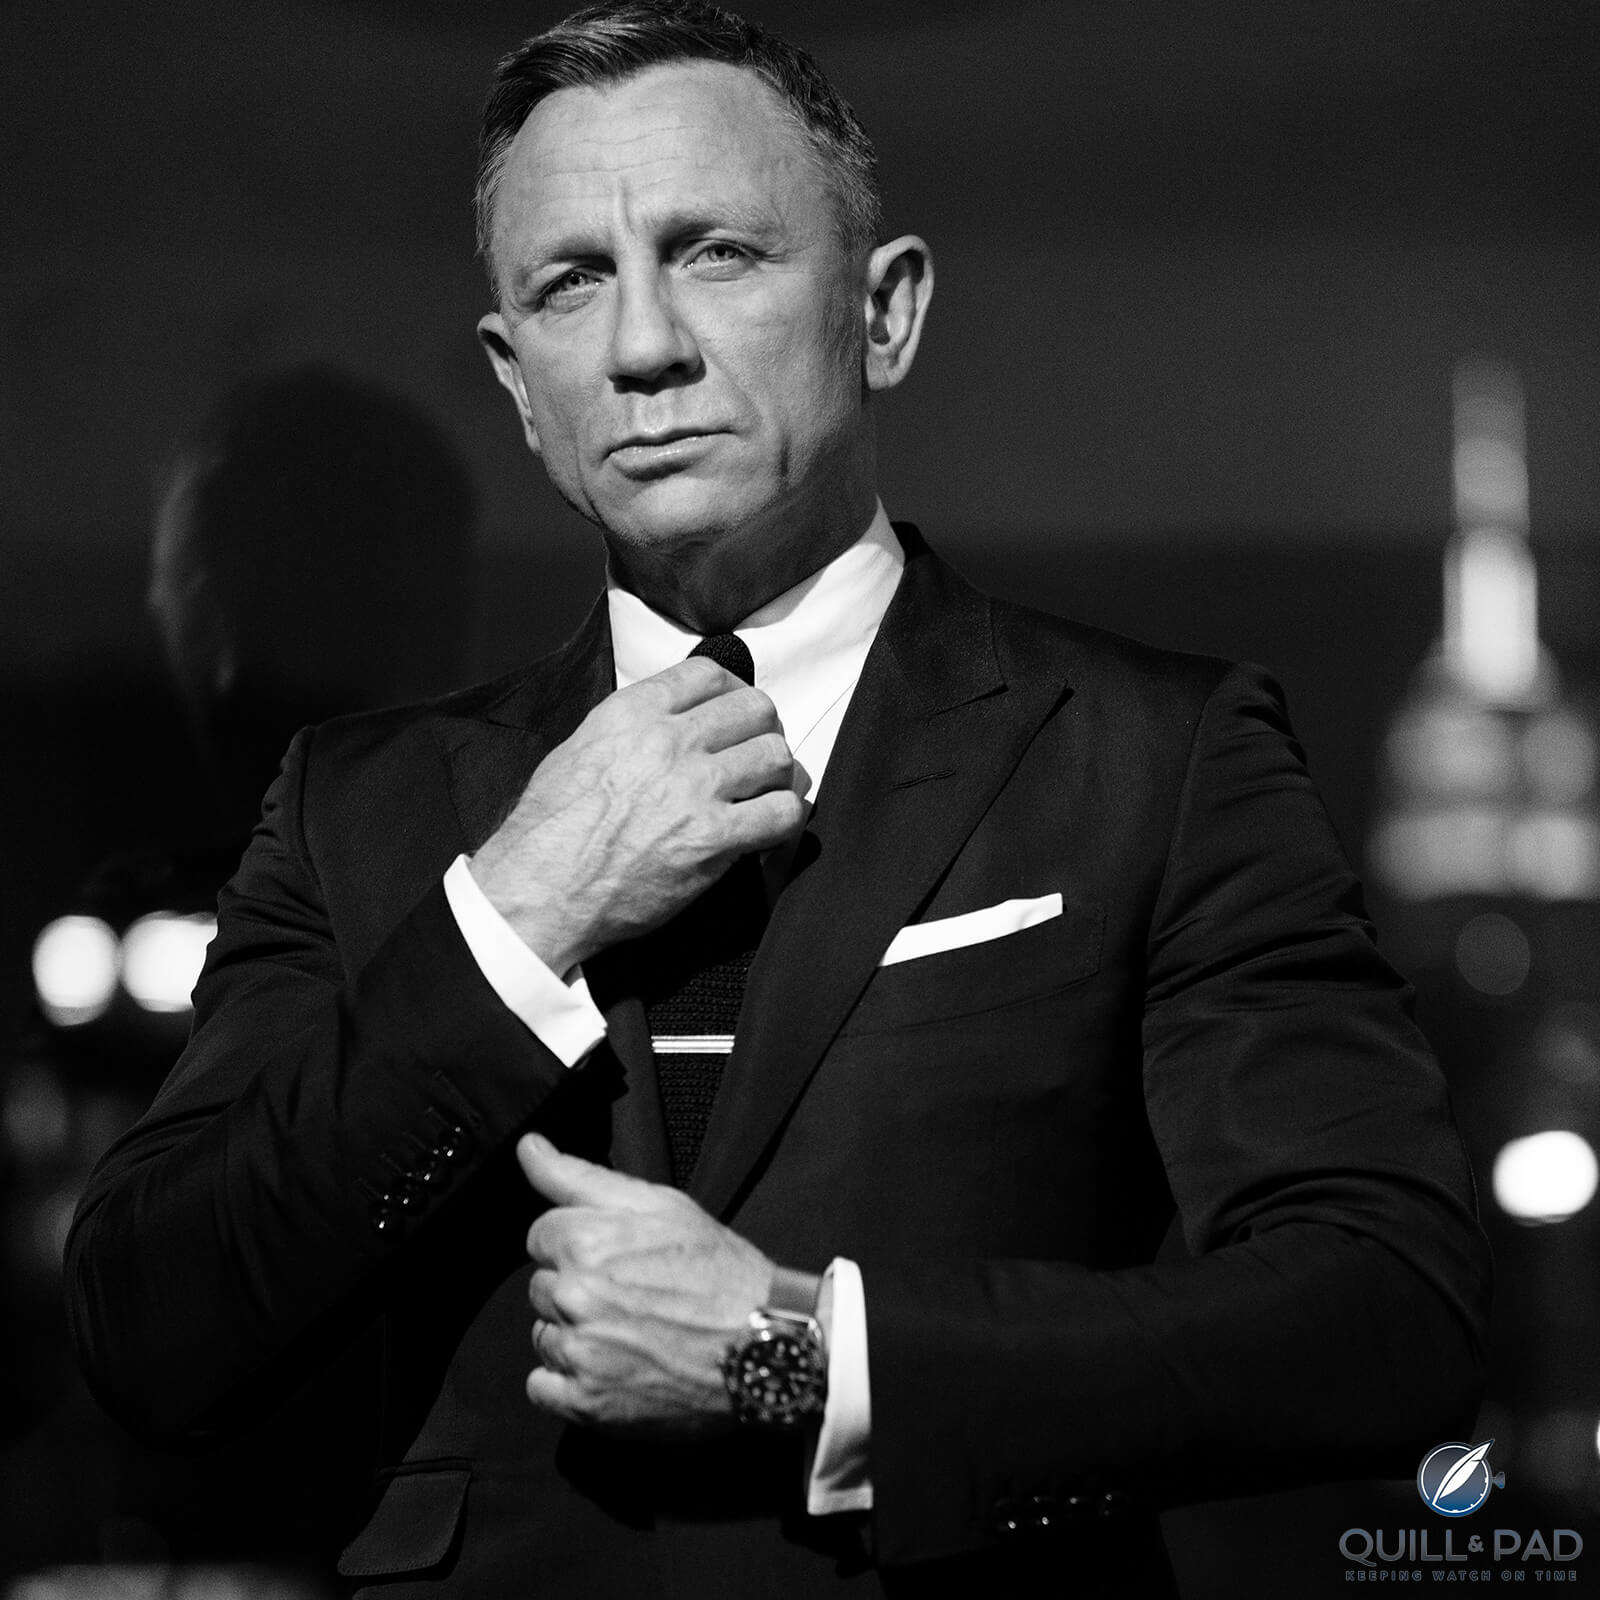 James Bond Had ‘No Time To Die’ With His Latest Omega Seamaster Diver ...